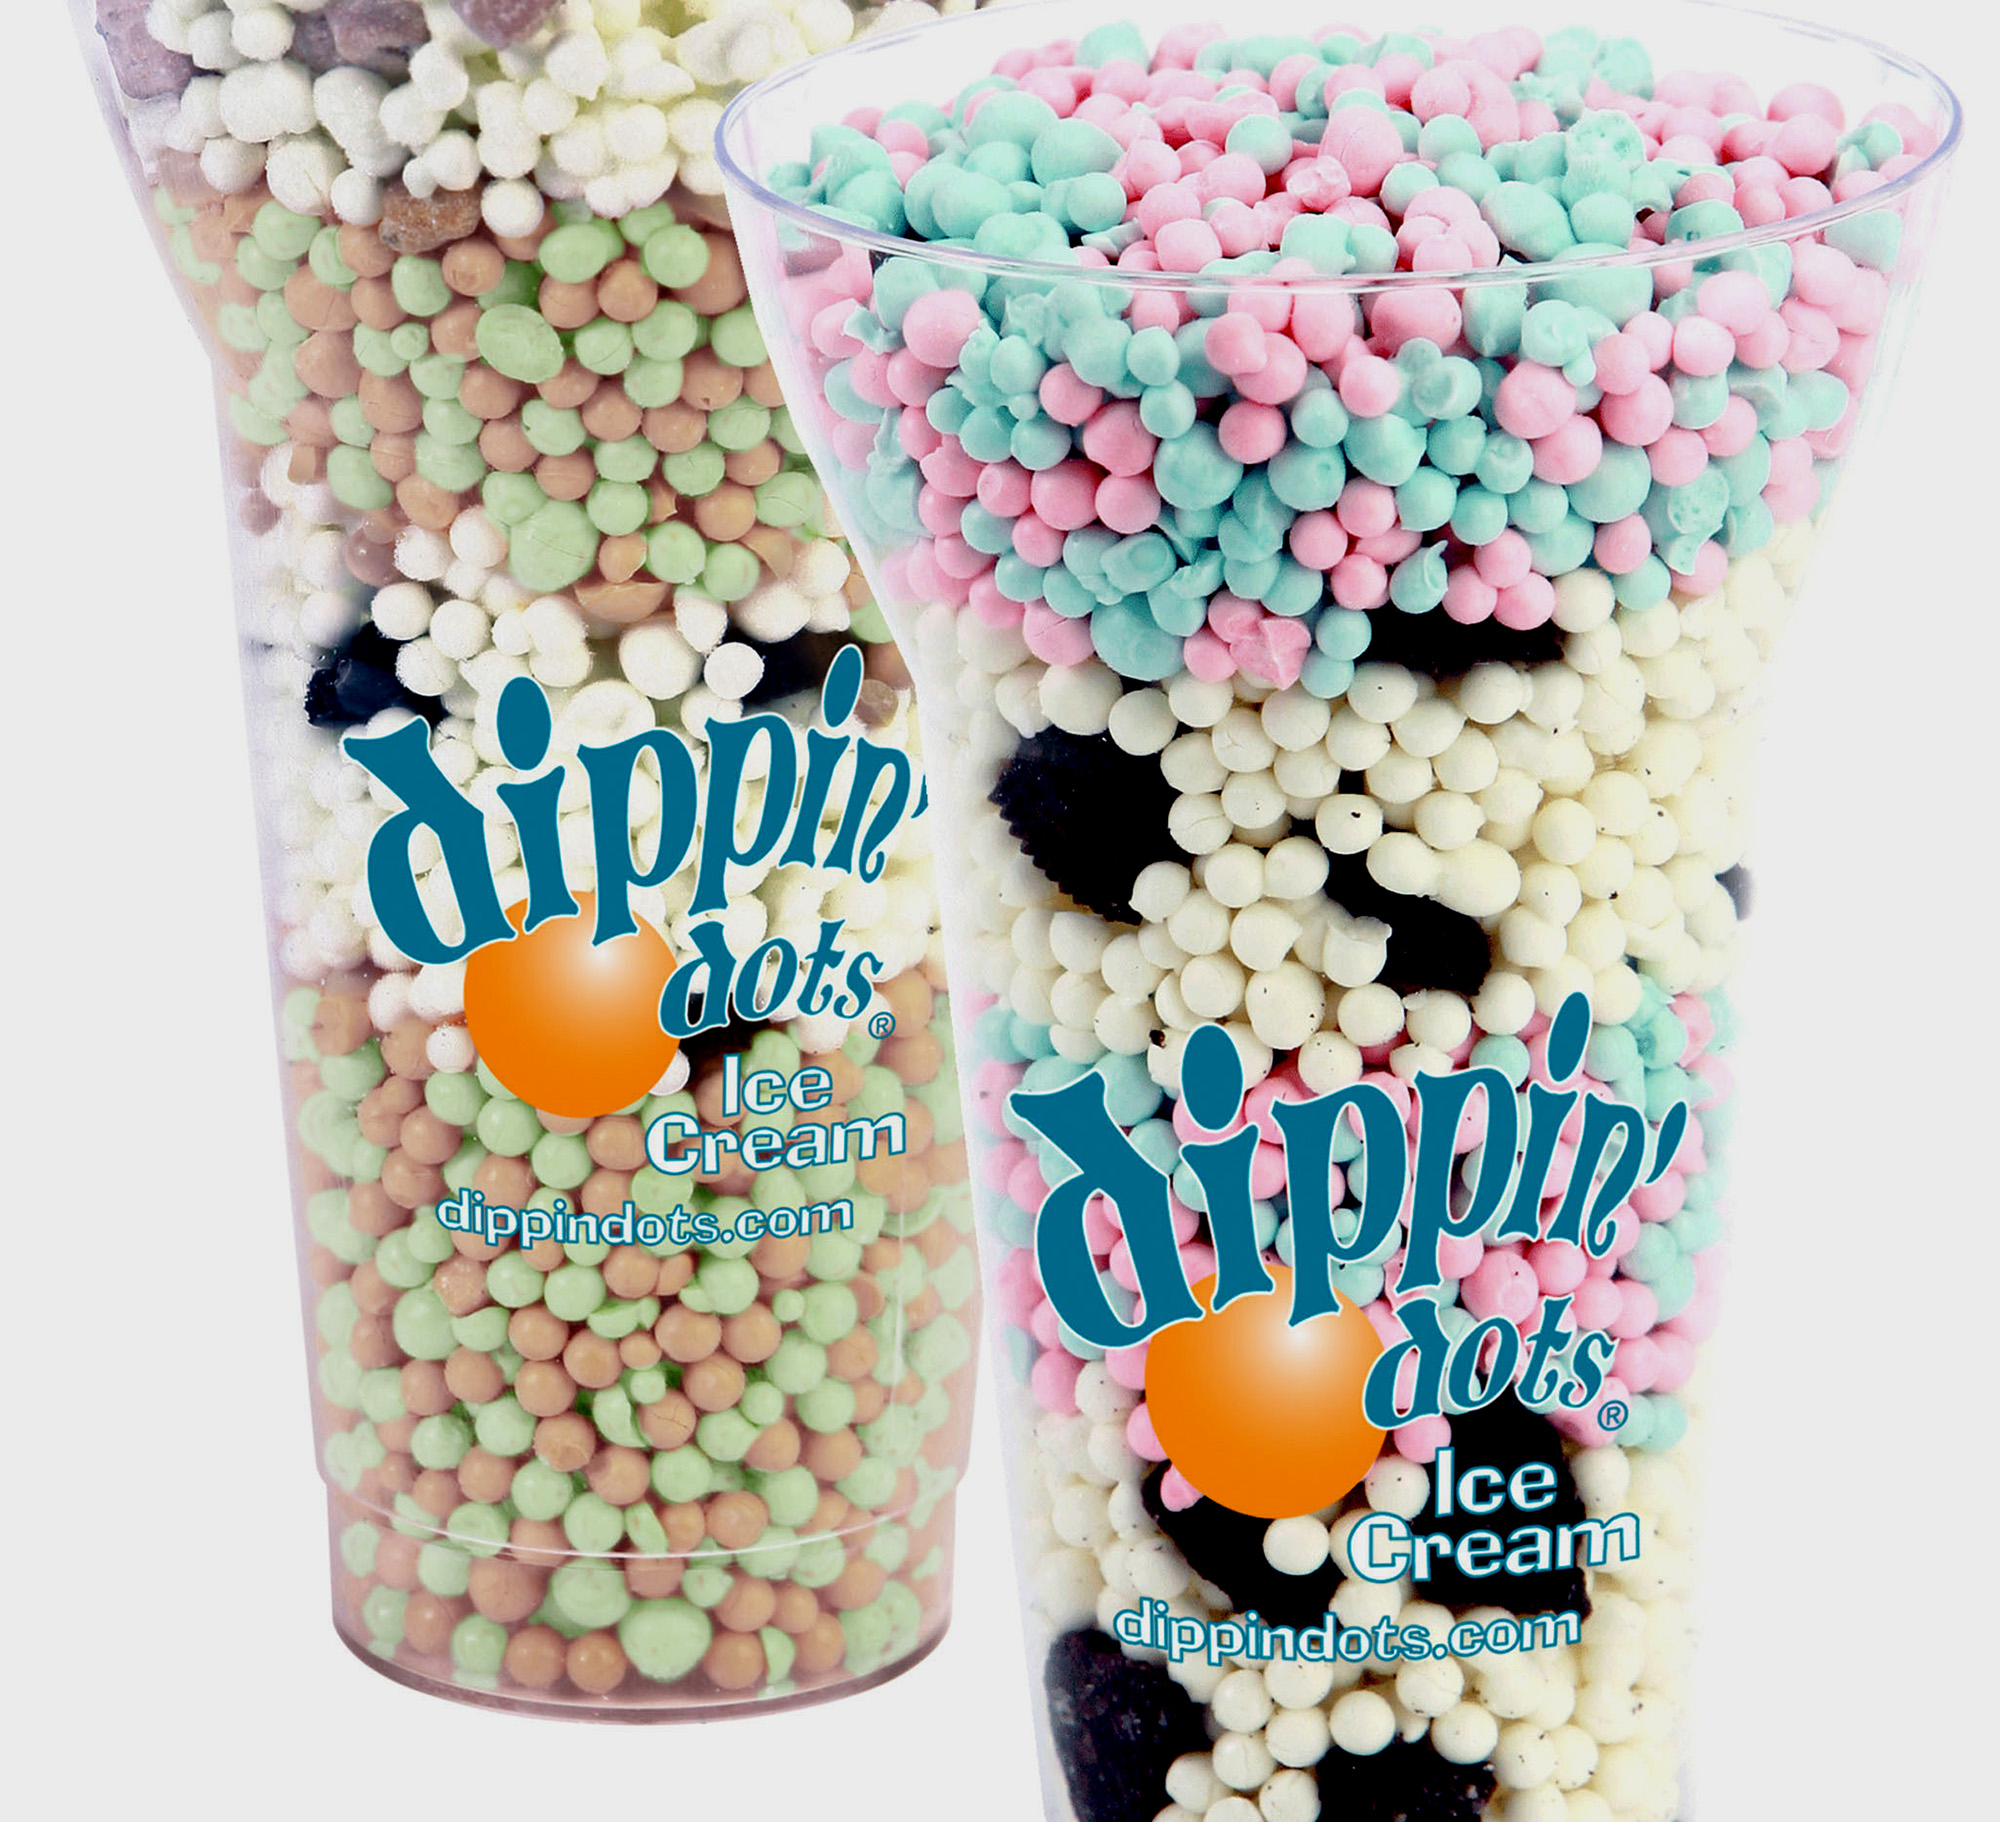 Record high sales for Dippin' Dots